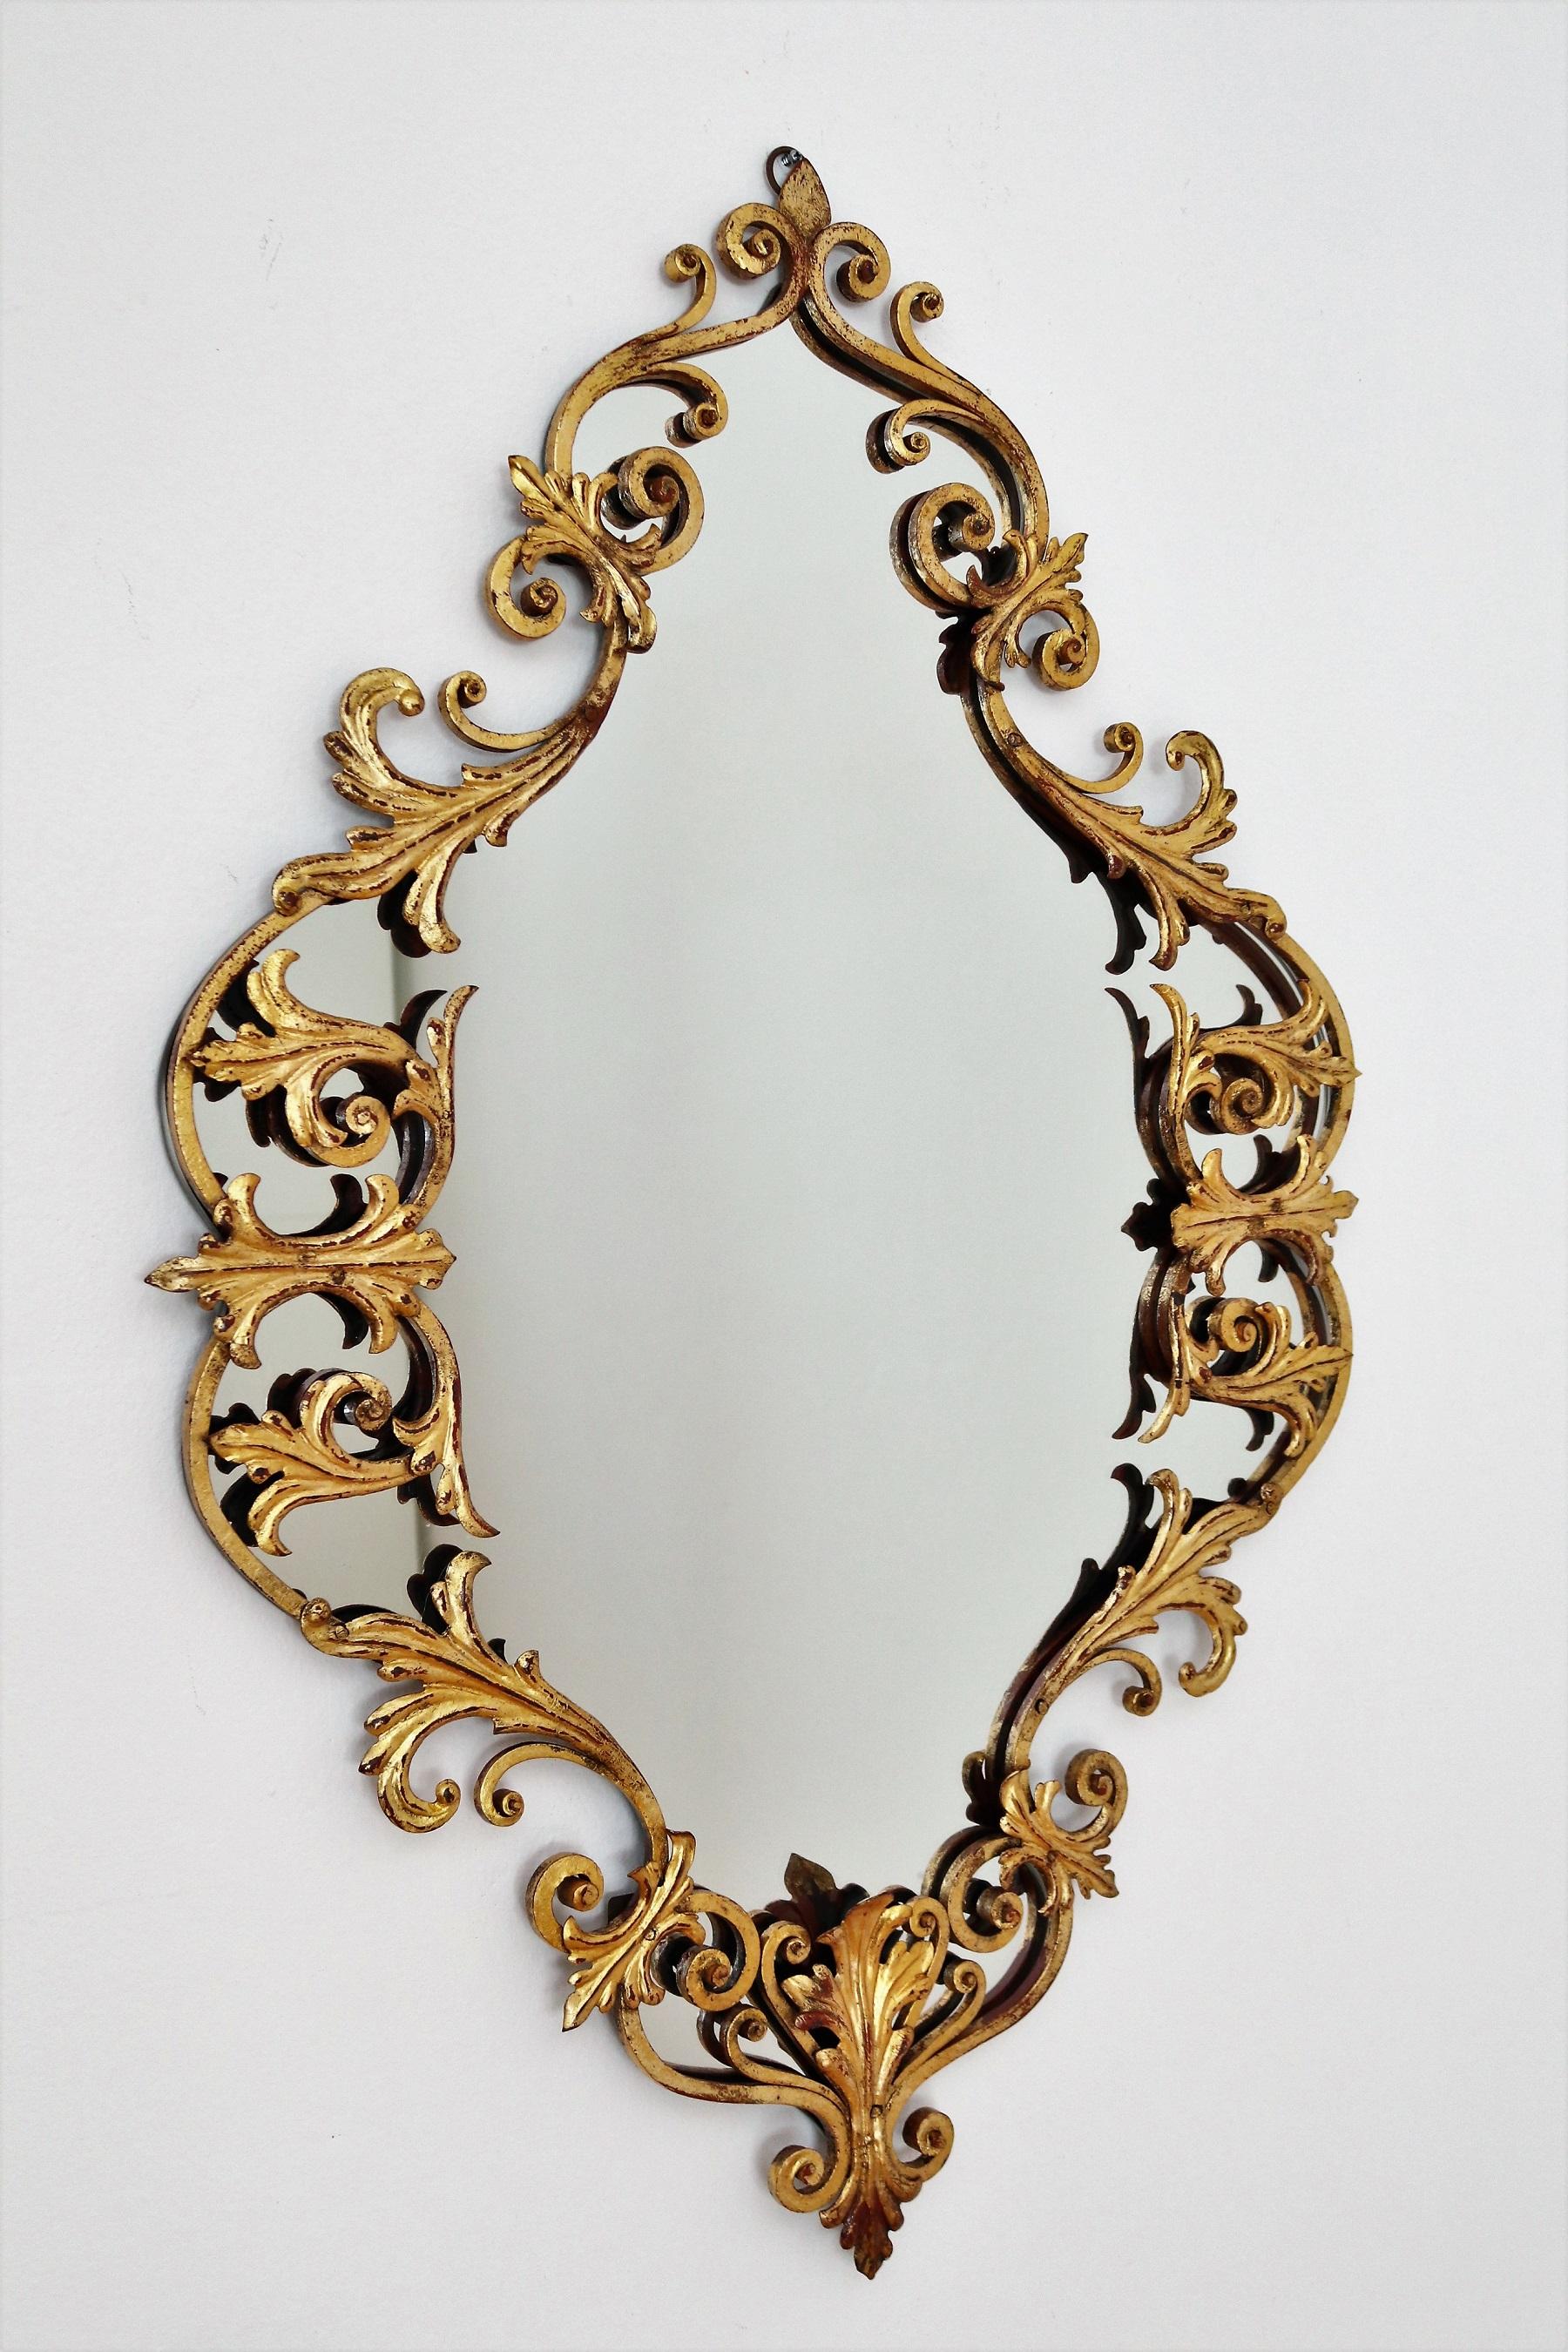 Beautiful wall mirror with hand-crafted gilt wrought iron frame in Baroque style.
The elaborately crafted frame made of hand-forged wrought iron is artfully antique gold-plated.
The mirror glass is in excellent condition.
At the backside a hook